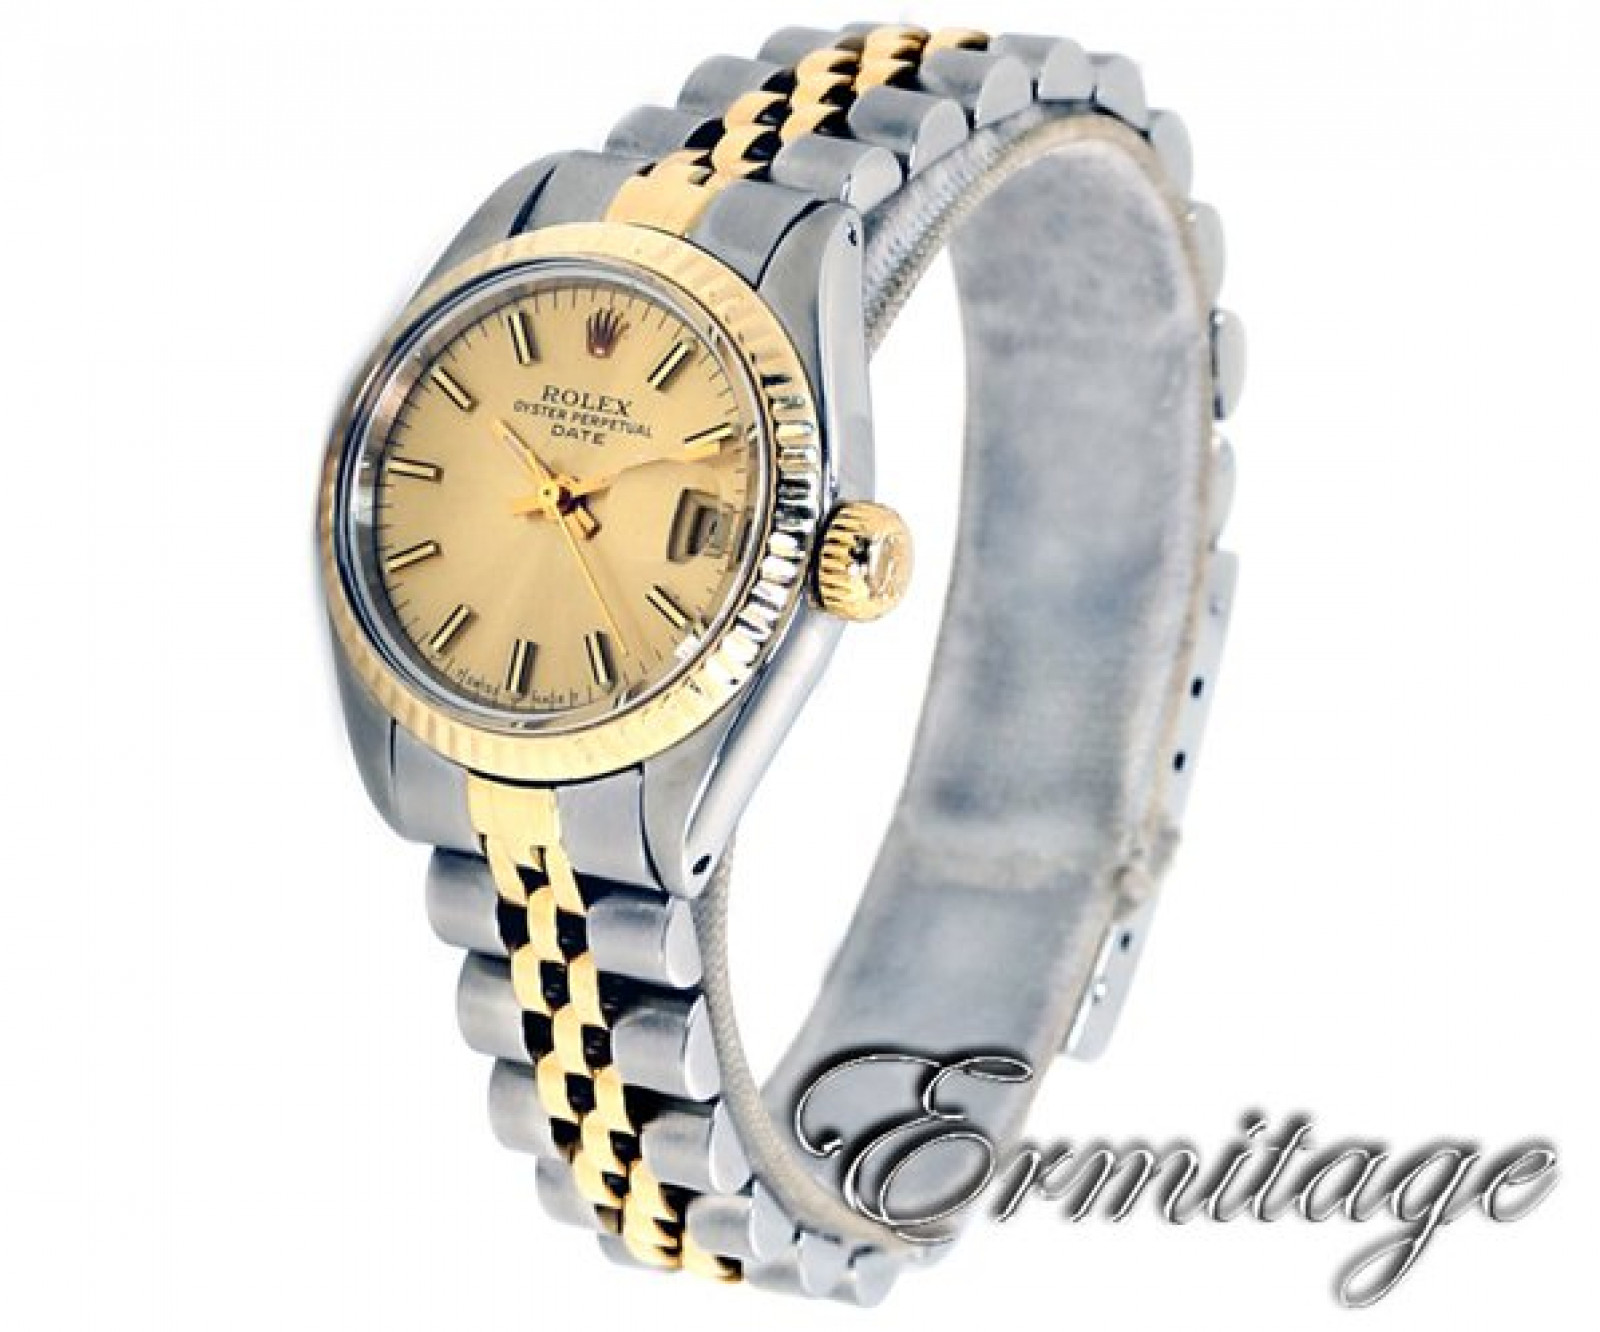 Vintage Rolex Date 6917 Gold & Steel with Champagne Dial